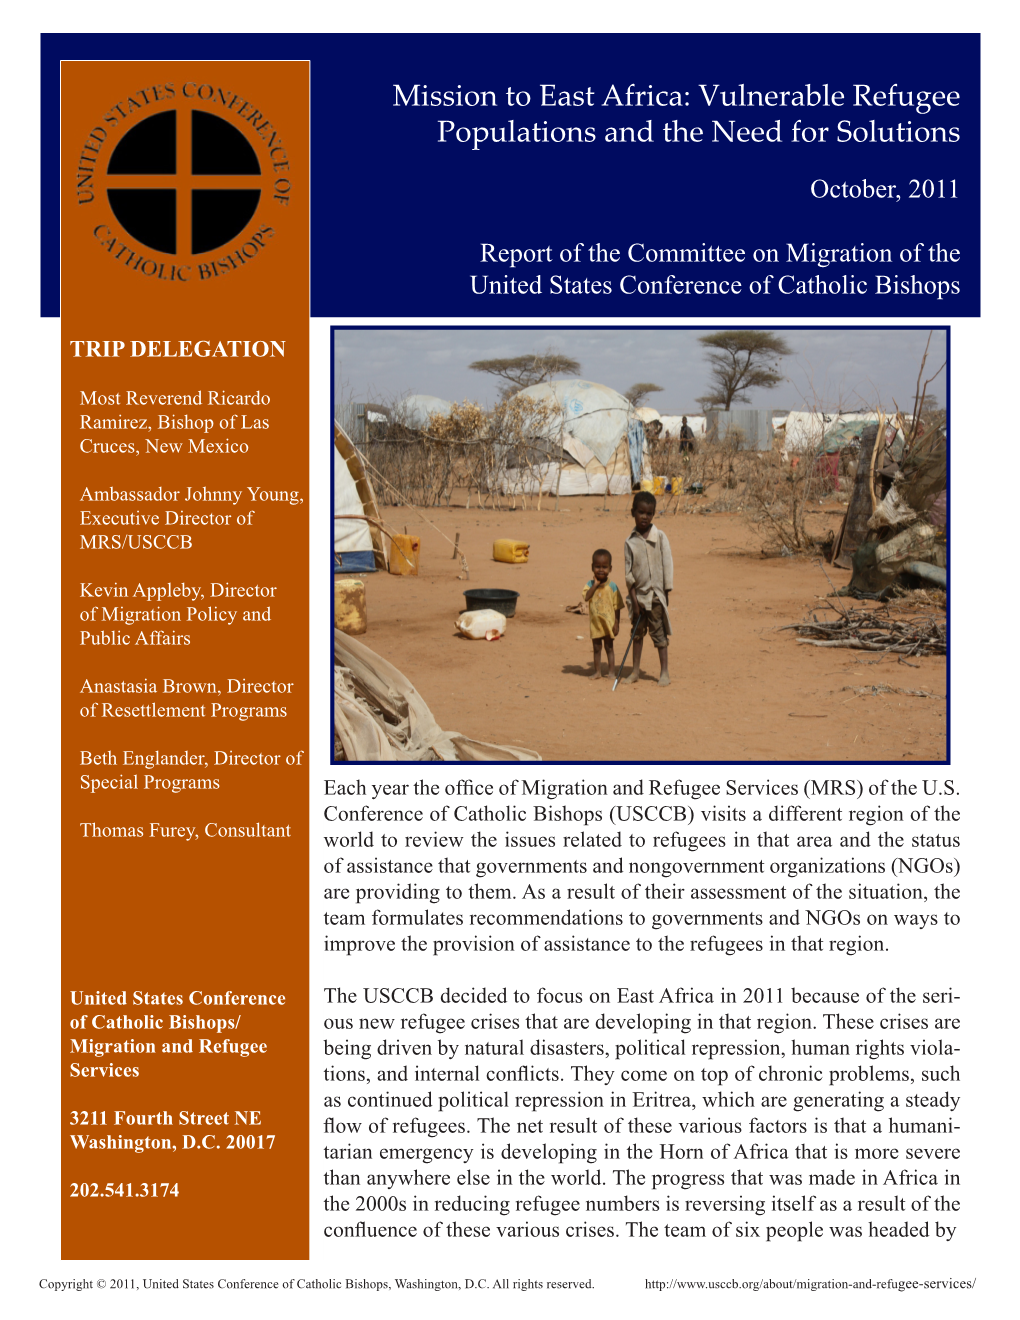 Mission to East Africa: Vulnerable Refugee Populations and the Need for Solutions